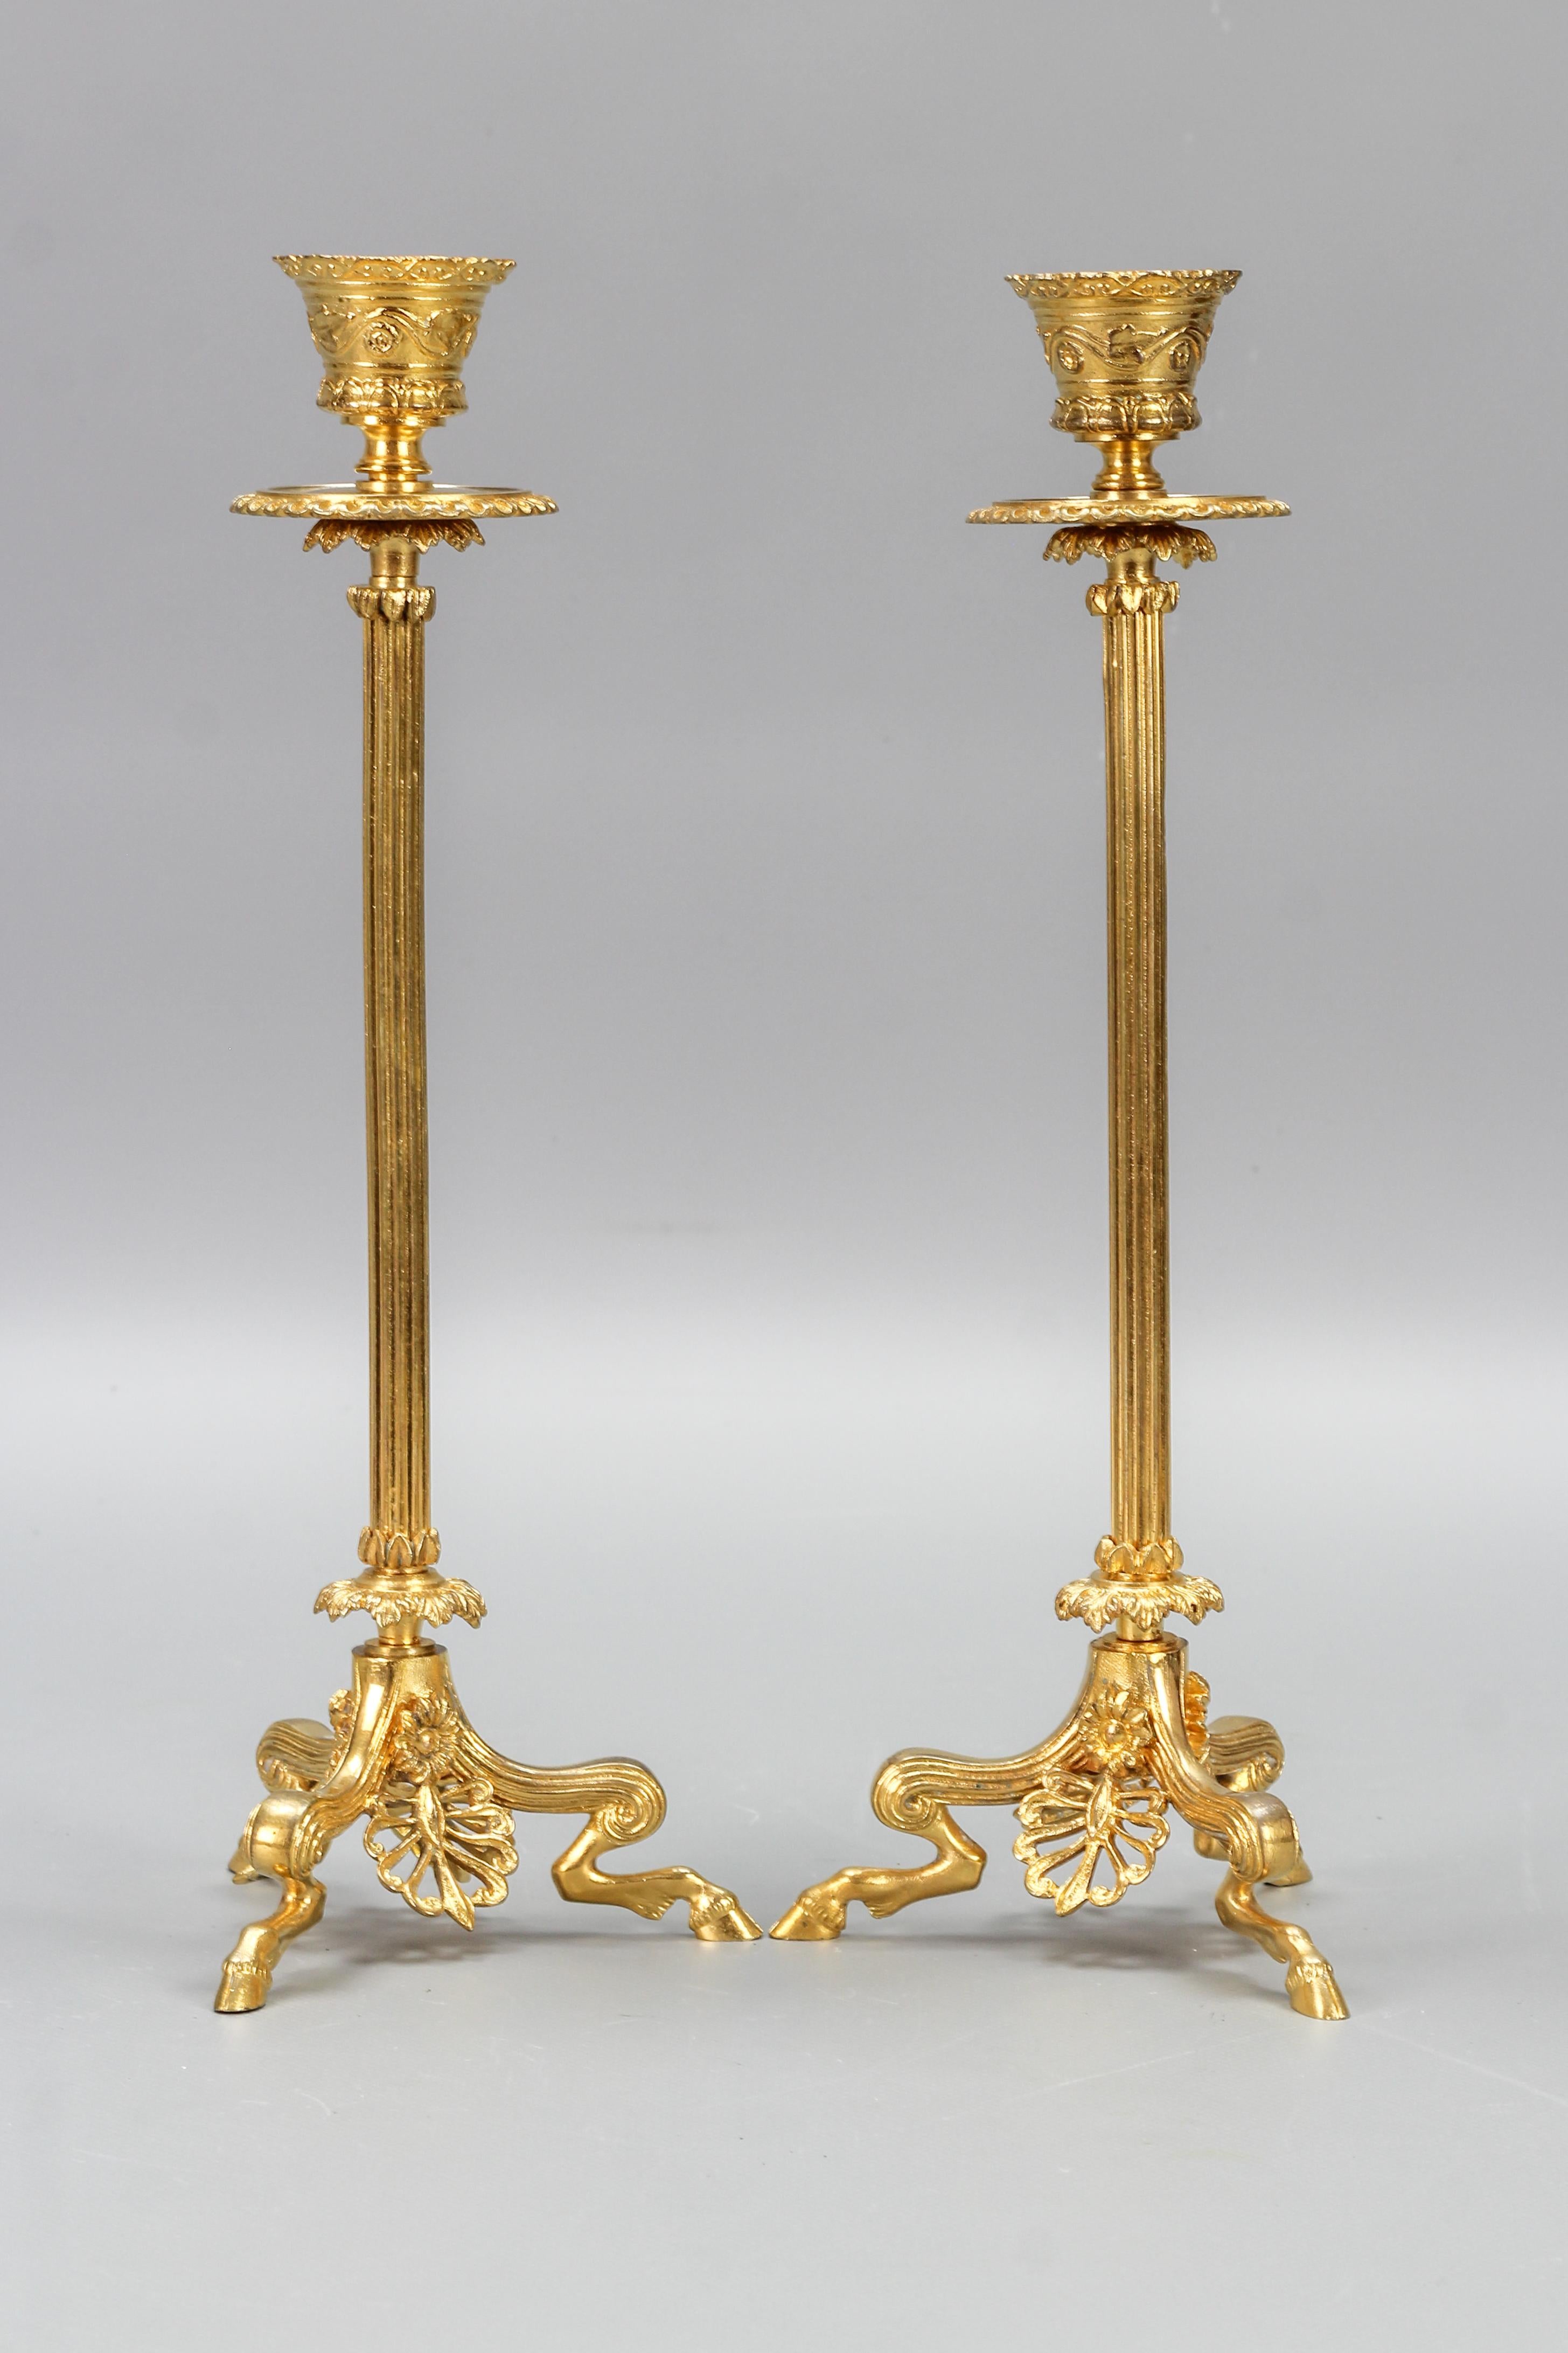 Pair of French Empire Style Gilt Bronze Candlesticks on Hoofed Faun Feet For Sale 1